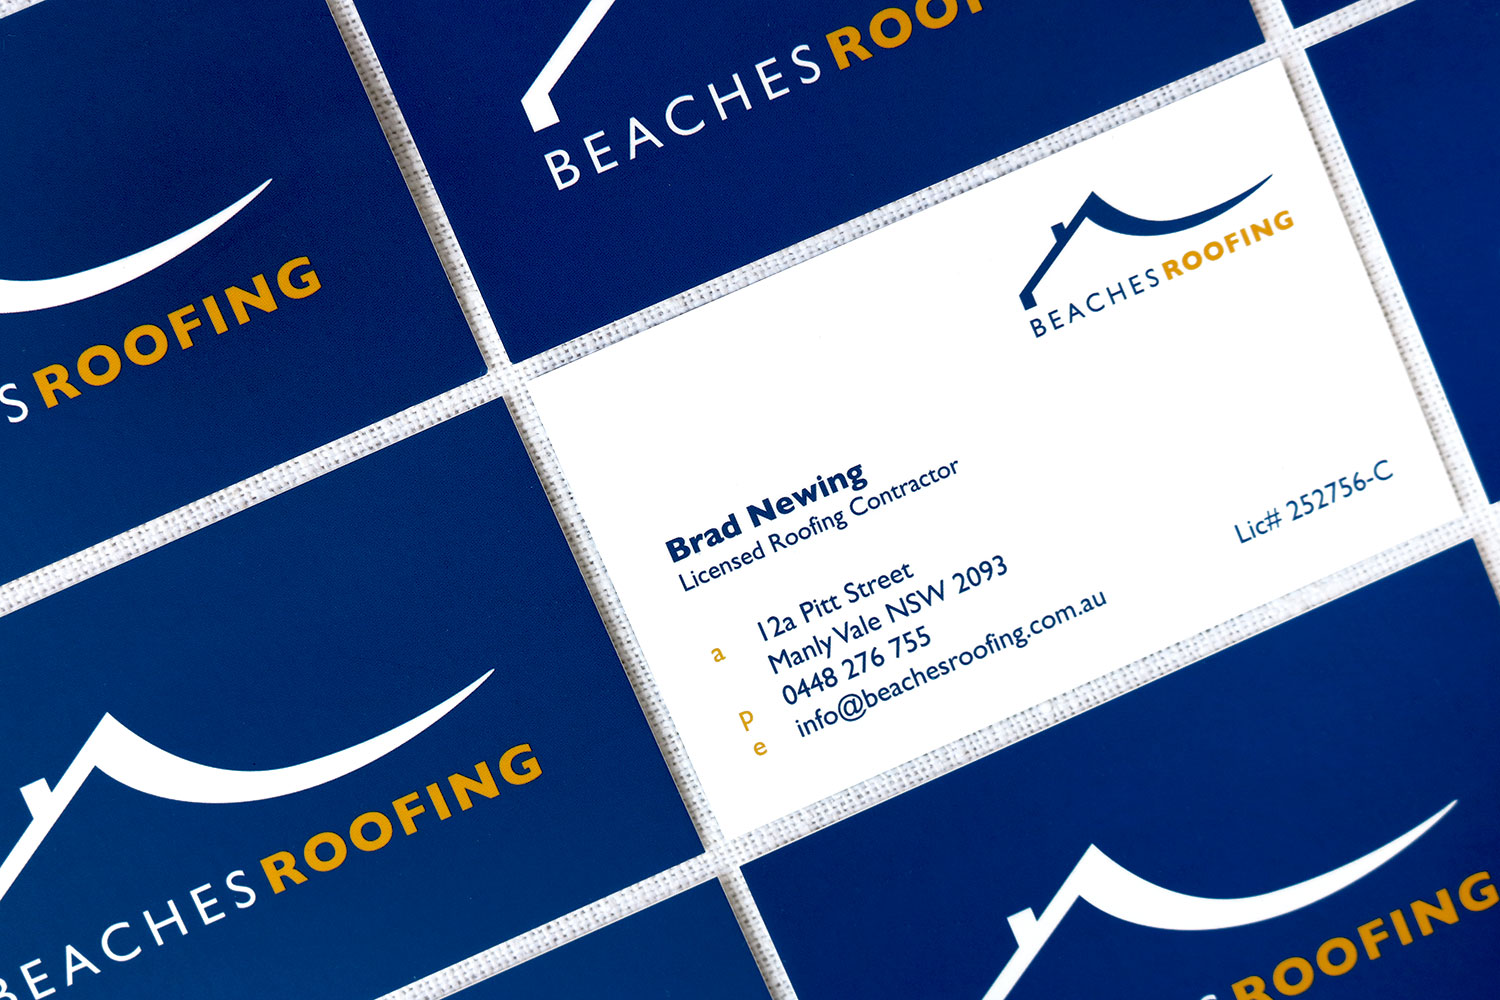 Beaches Roofing Business Cards